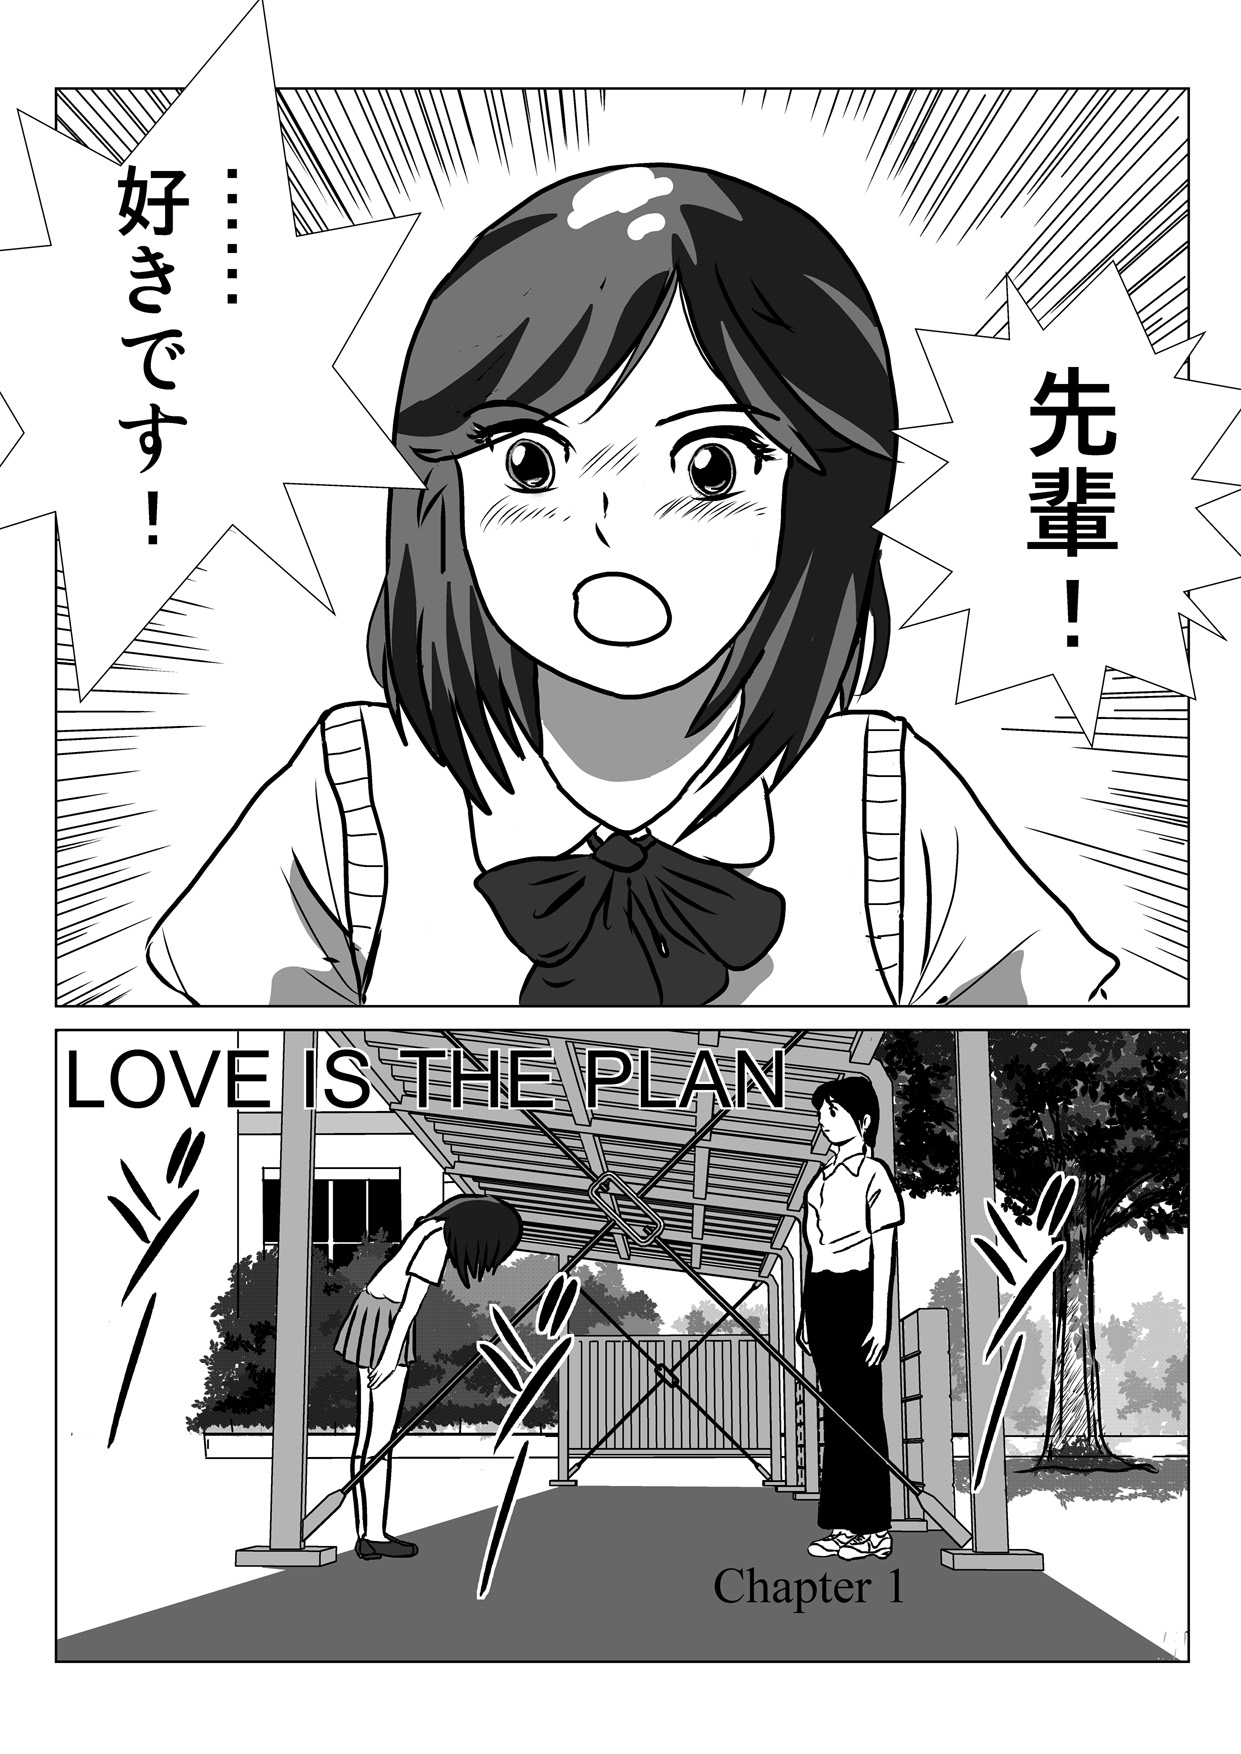 [I ／ H ／ R] LOVE IS THE PLAN第1章＆amp; 2